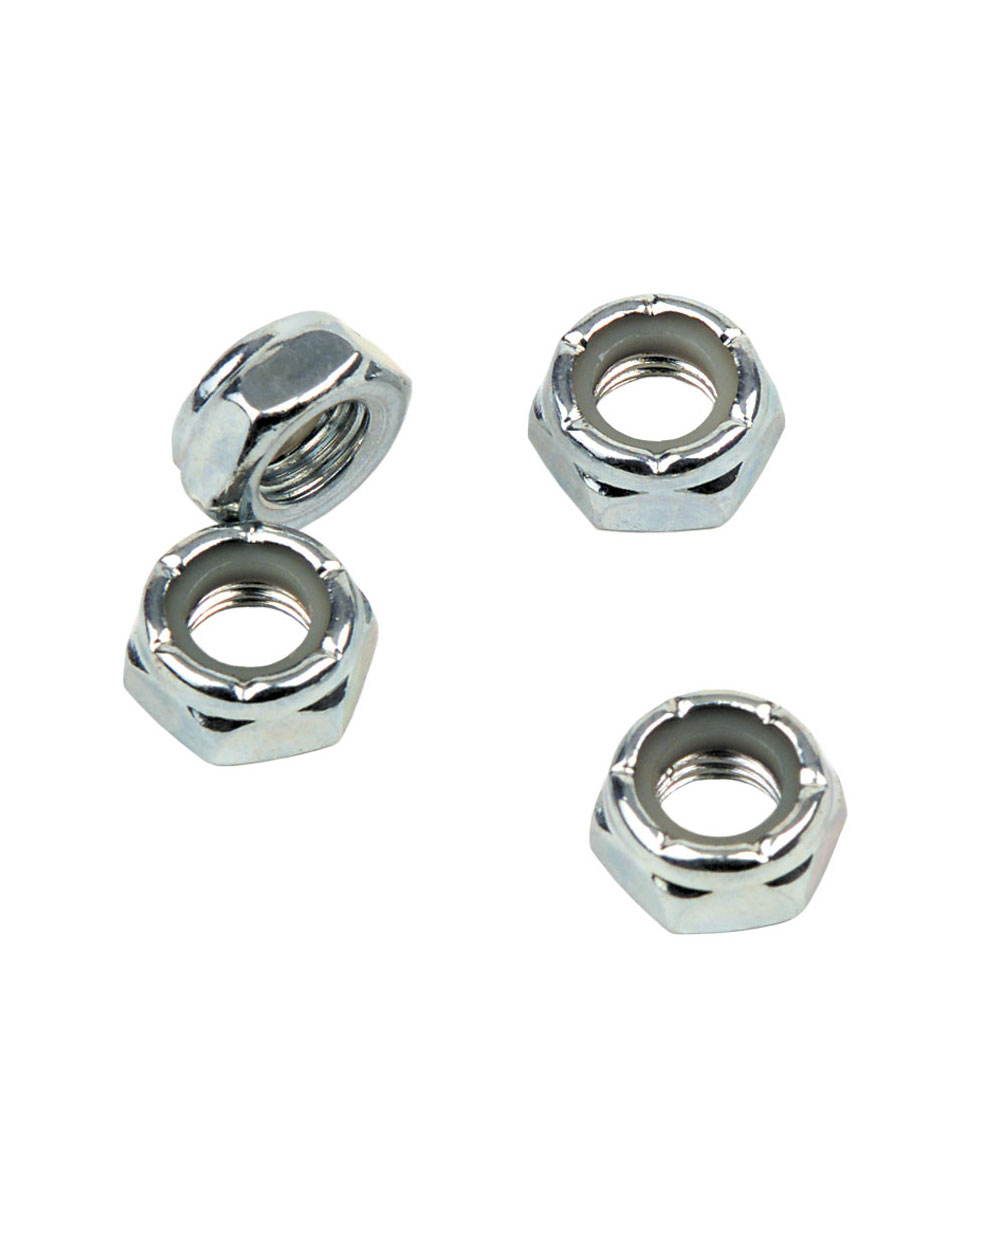 Independent Genuine Kingpin Nut pack of 4